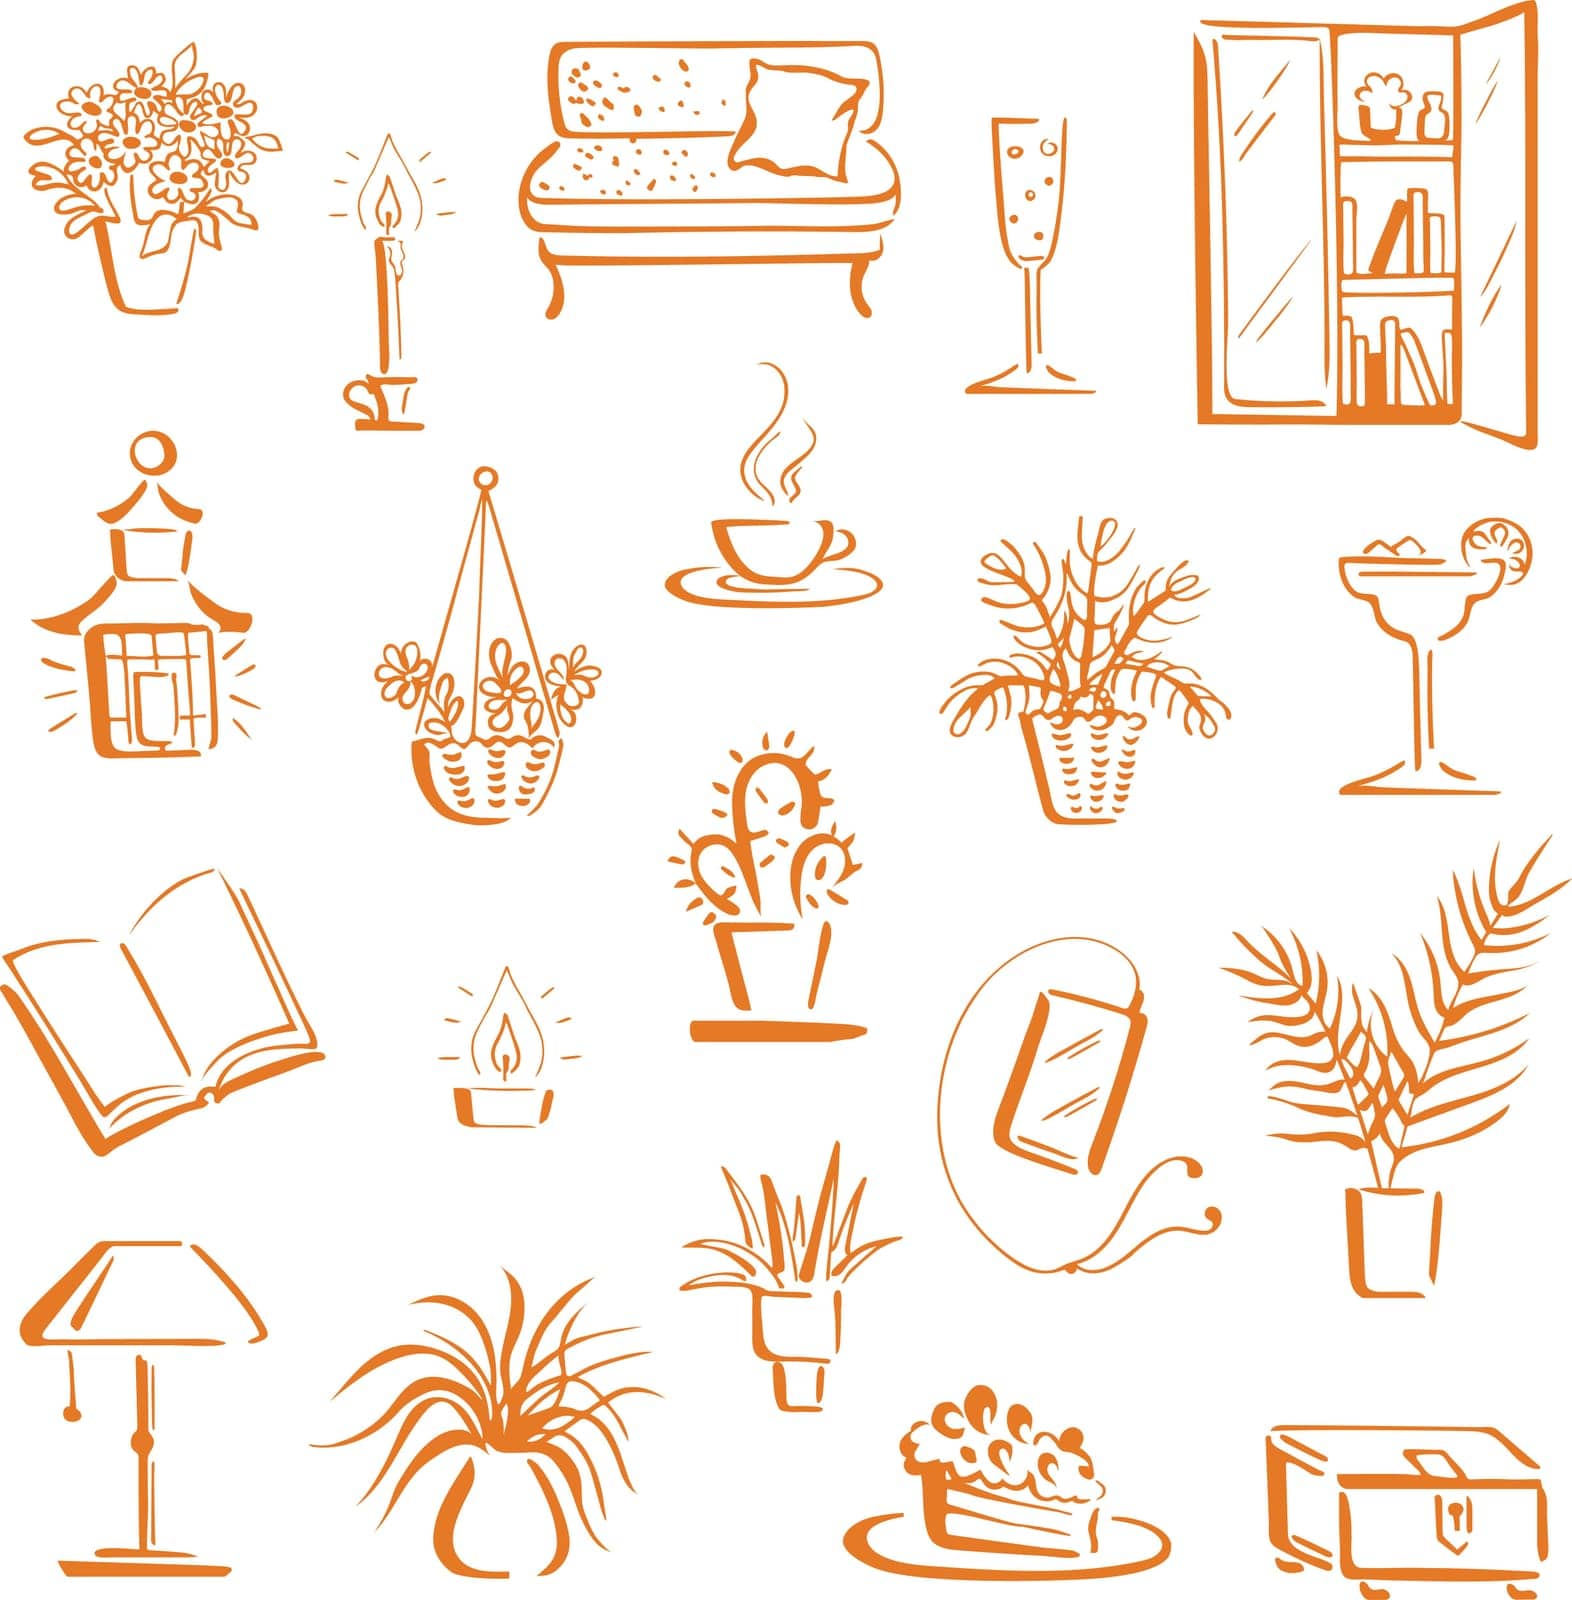 Home hygge, relax mood. Hand-drawn brush doodles of couch or sofa, house plants, book and tablet with earbuds, tealight and candle, cake or pie and drinks - tea, wine, and cocktail